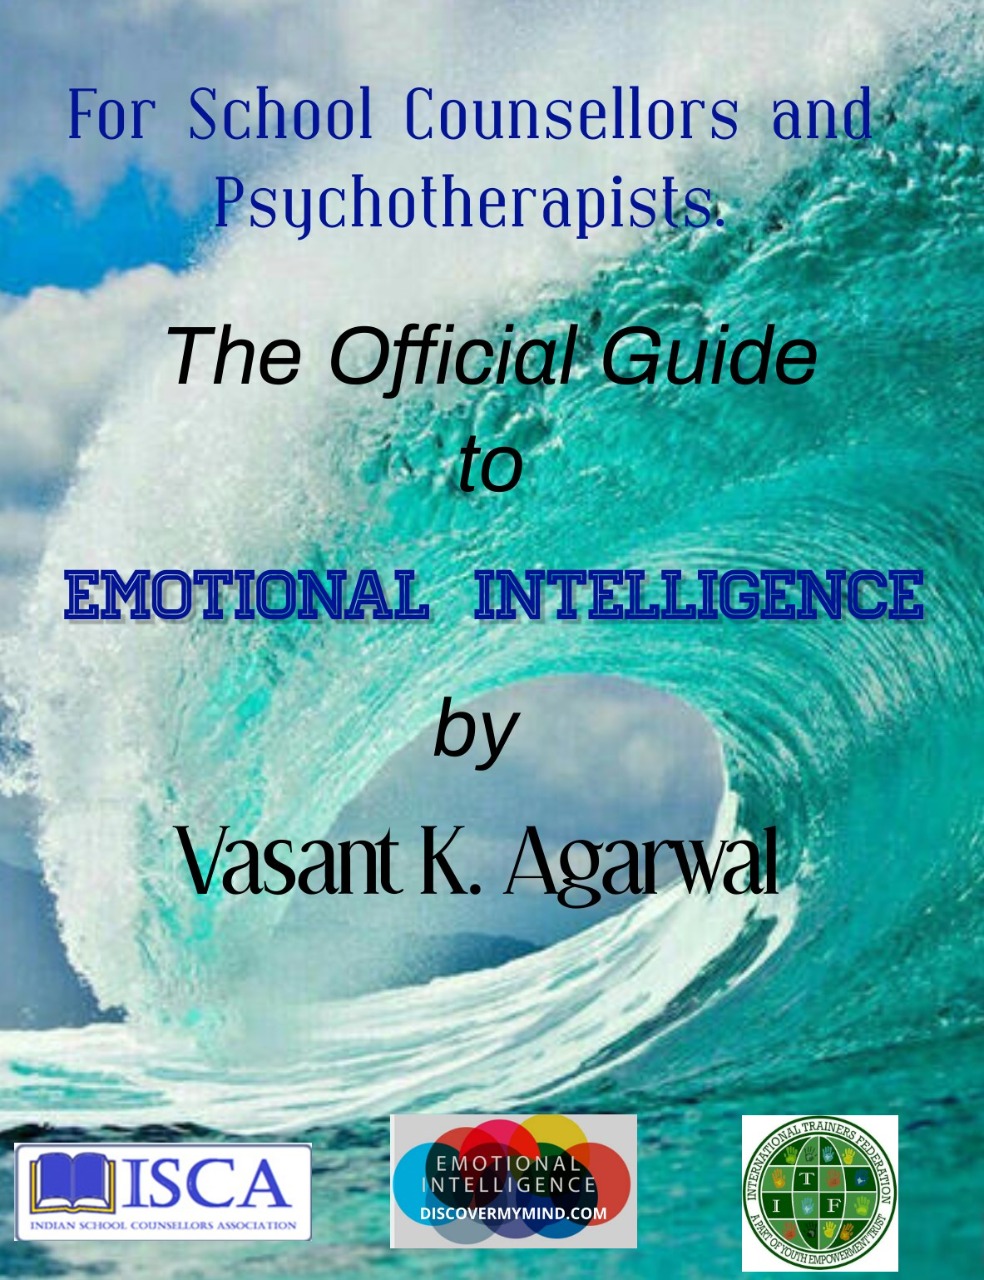 The Complete Guide to Emotional Intelligence